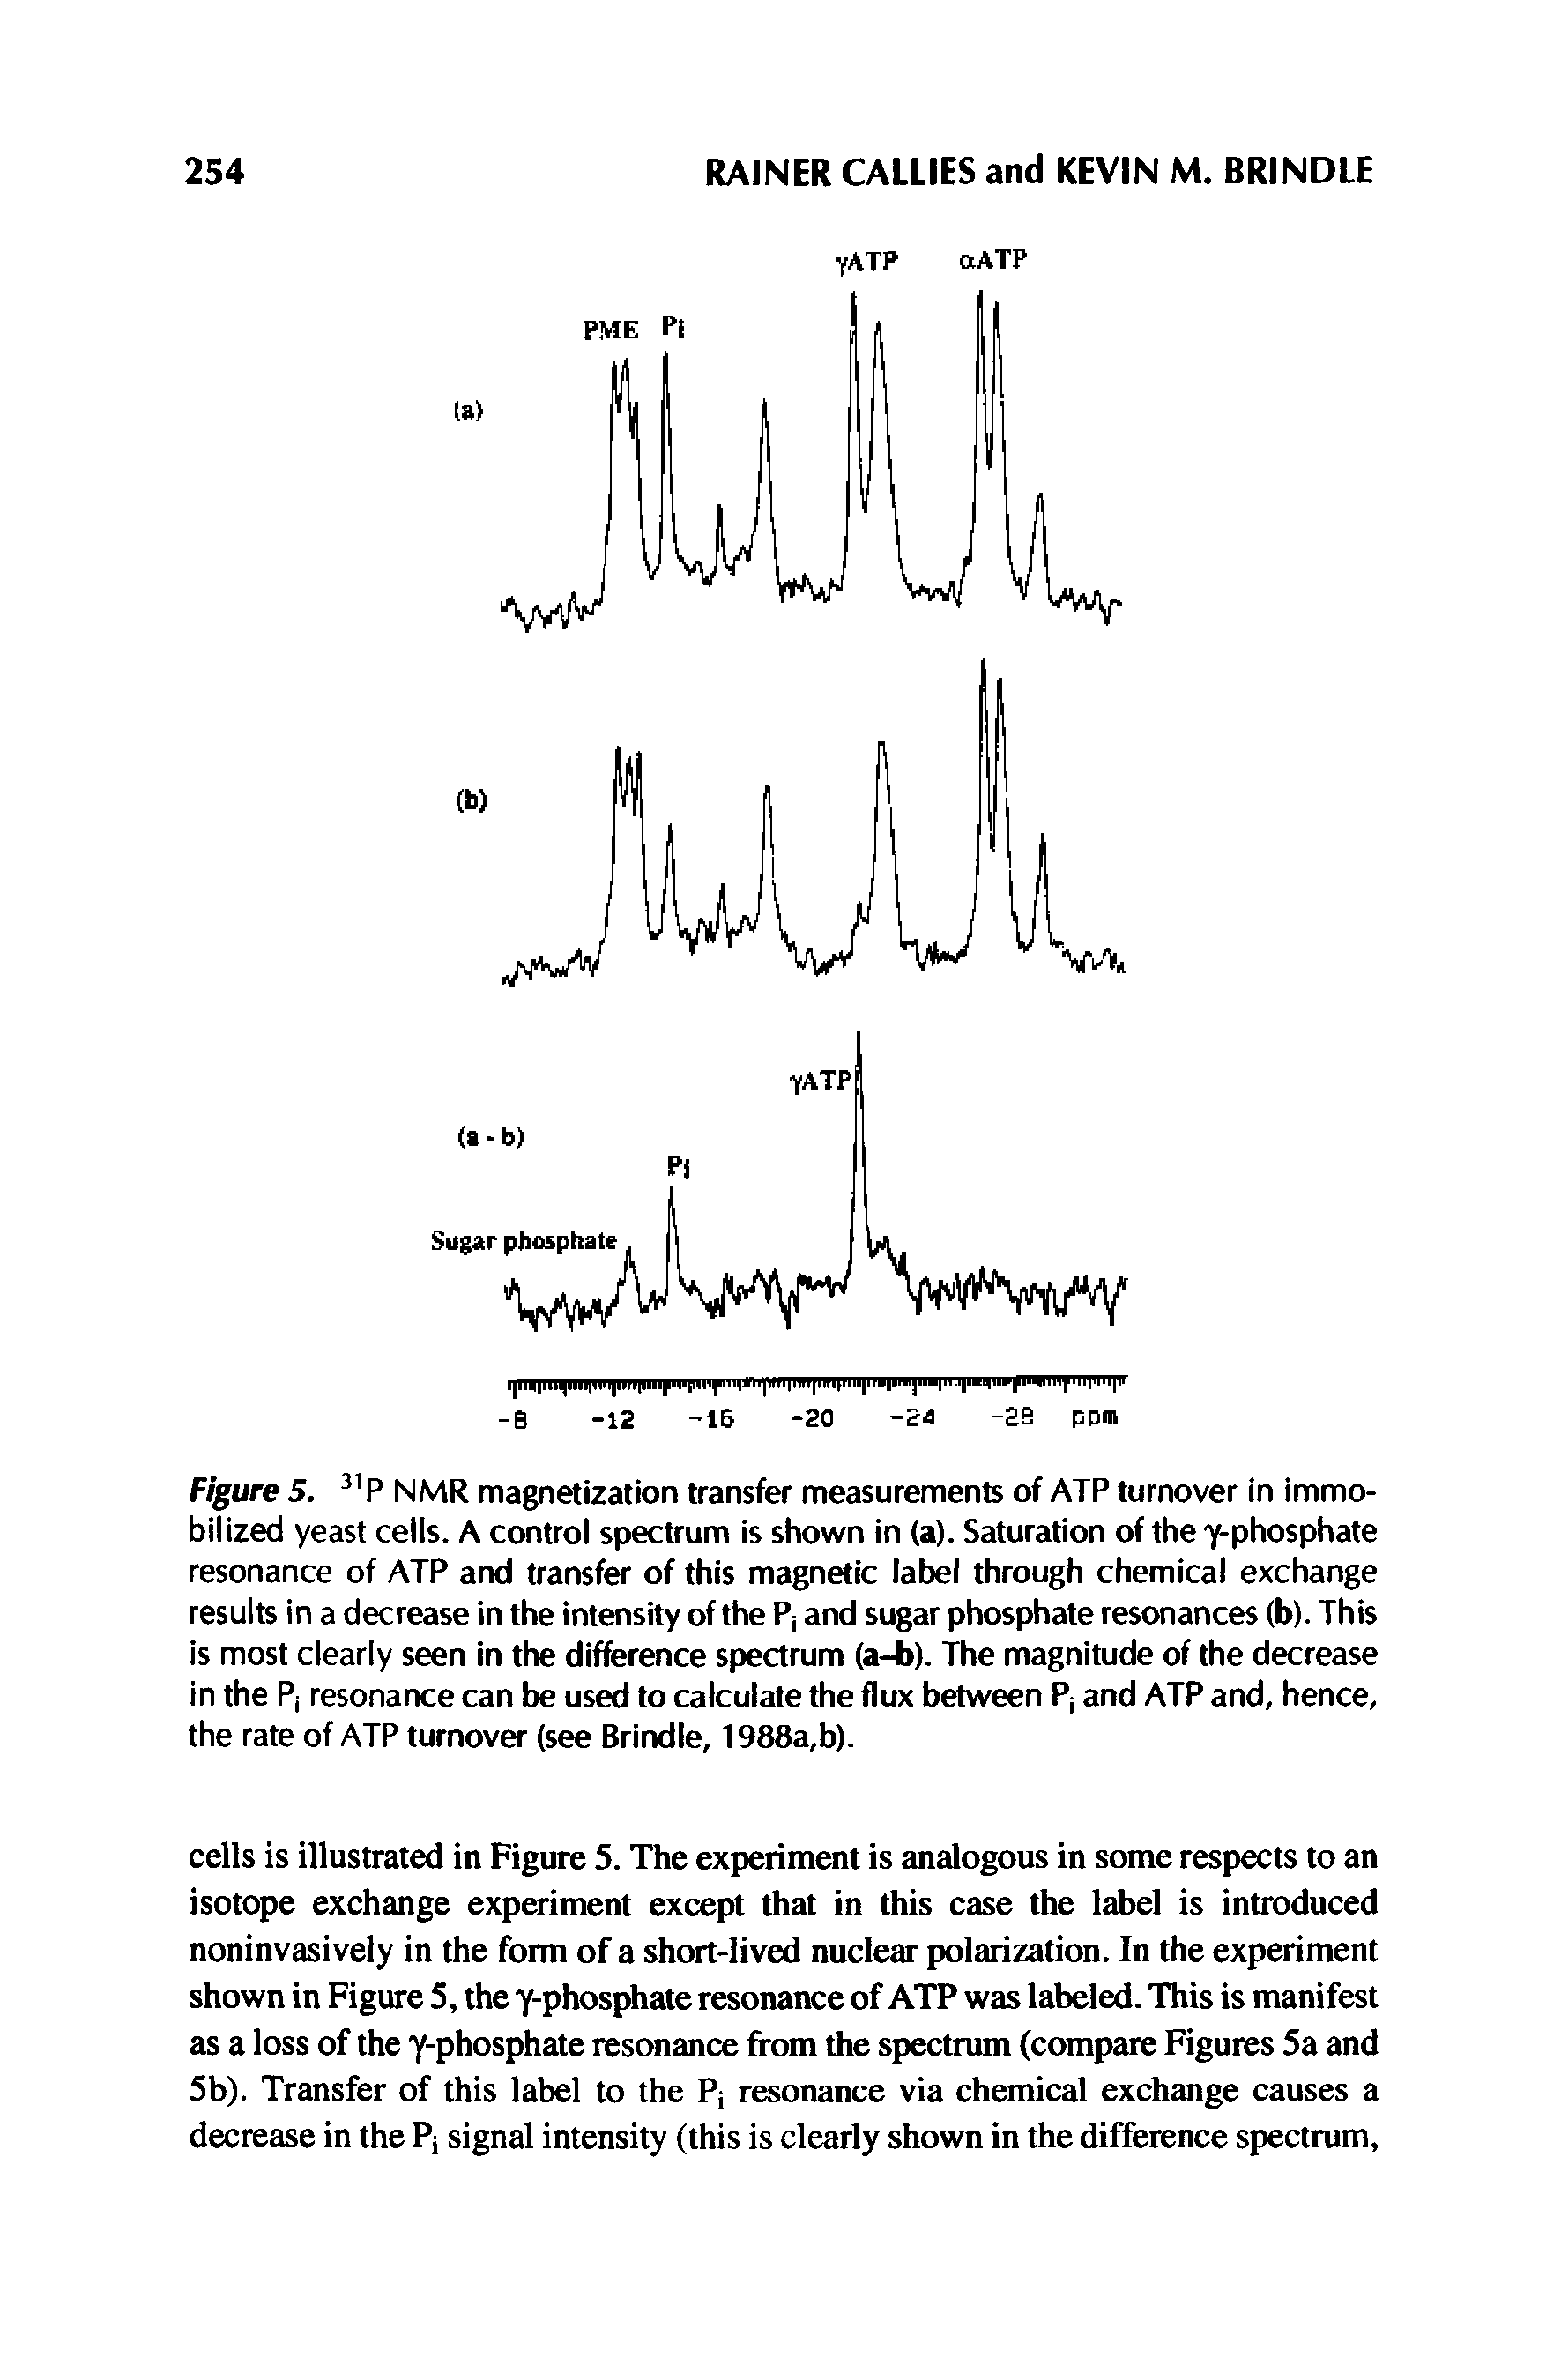 Figure 5. 31P NMR magnetization transfer measurements of ATP turnover in immobilized yeast cells. A control spectrum is shown in (a). Saturation of the y-phosphate resonance of ATP and transfer of this magnetic label through chemical exchange results in a decrease in the intensity of the P, and sugar phosphate resonances (b). This is most clearly seen in the difference spectrum (a-b). The magnitude of the decrease in the P, resonance can be used to calculate the flux between P, and ATP and, hence, the rate of ATP turnover (see Brindle, 1988a,b).